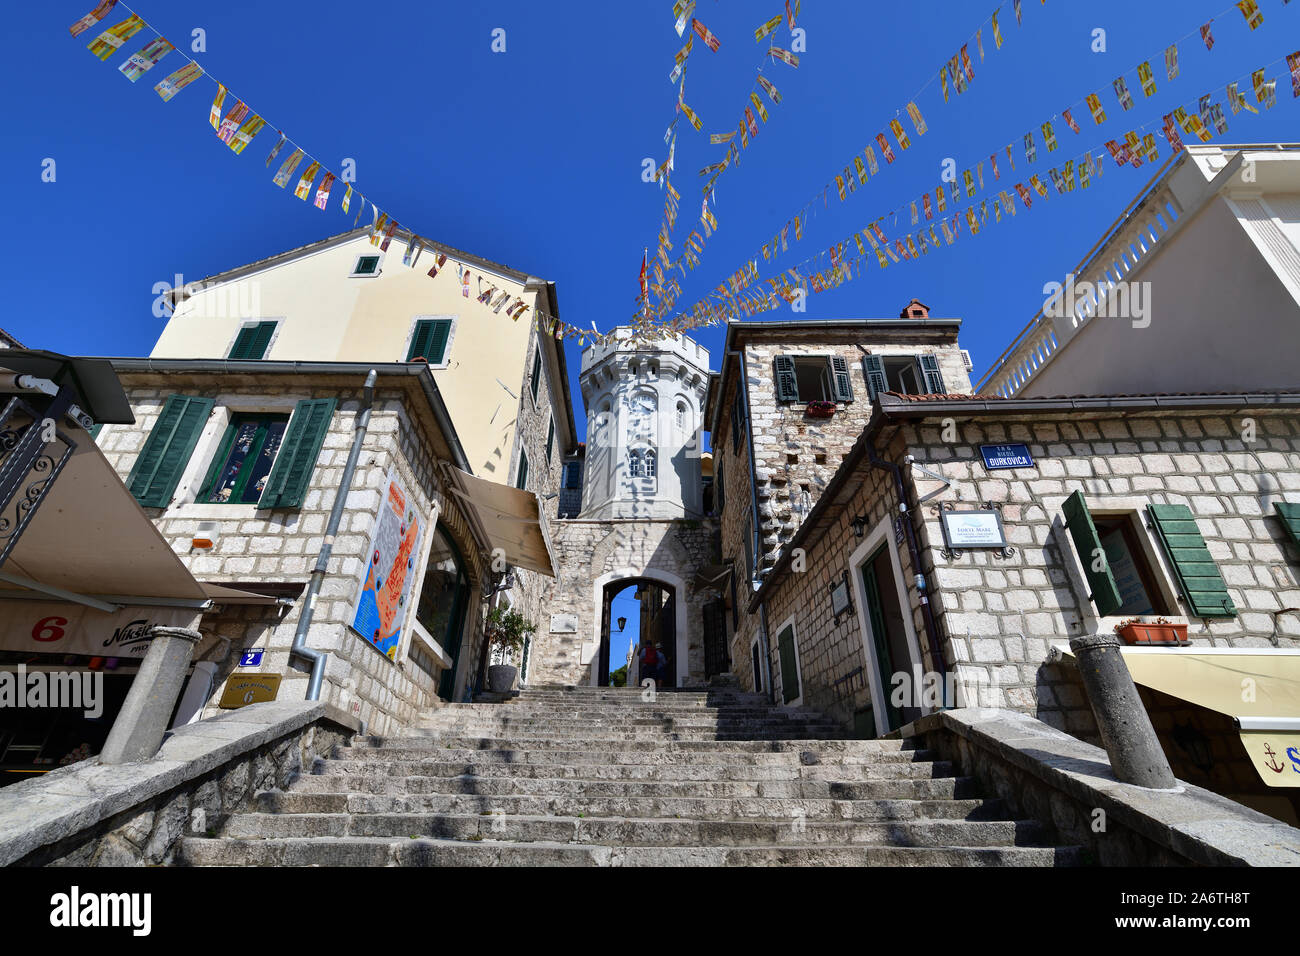 Herceg Novi, Montenegro - June 10. 2019. The area of the old city. View of the clock tower of Sat Kula. Stock Photo